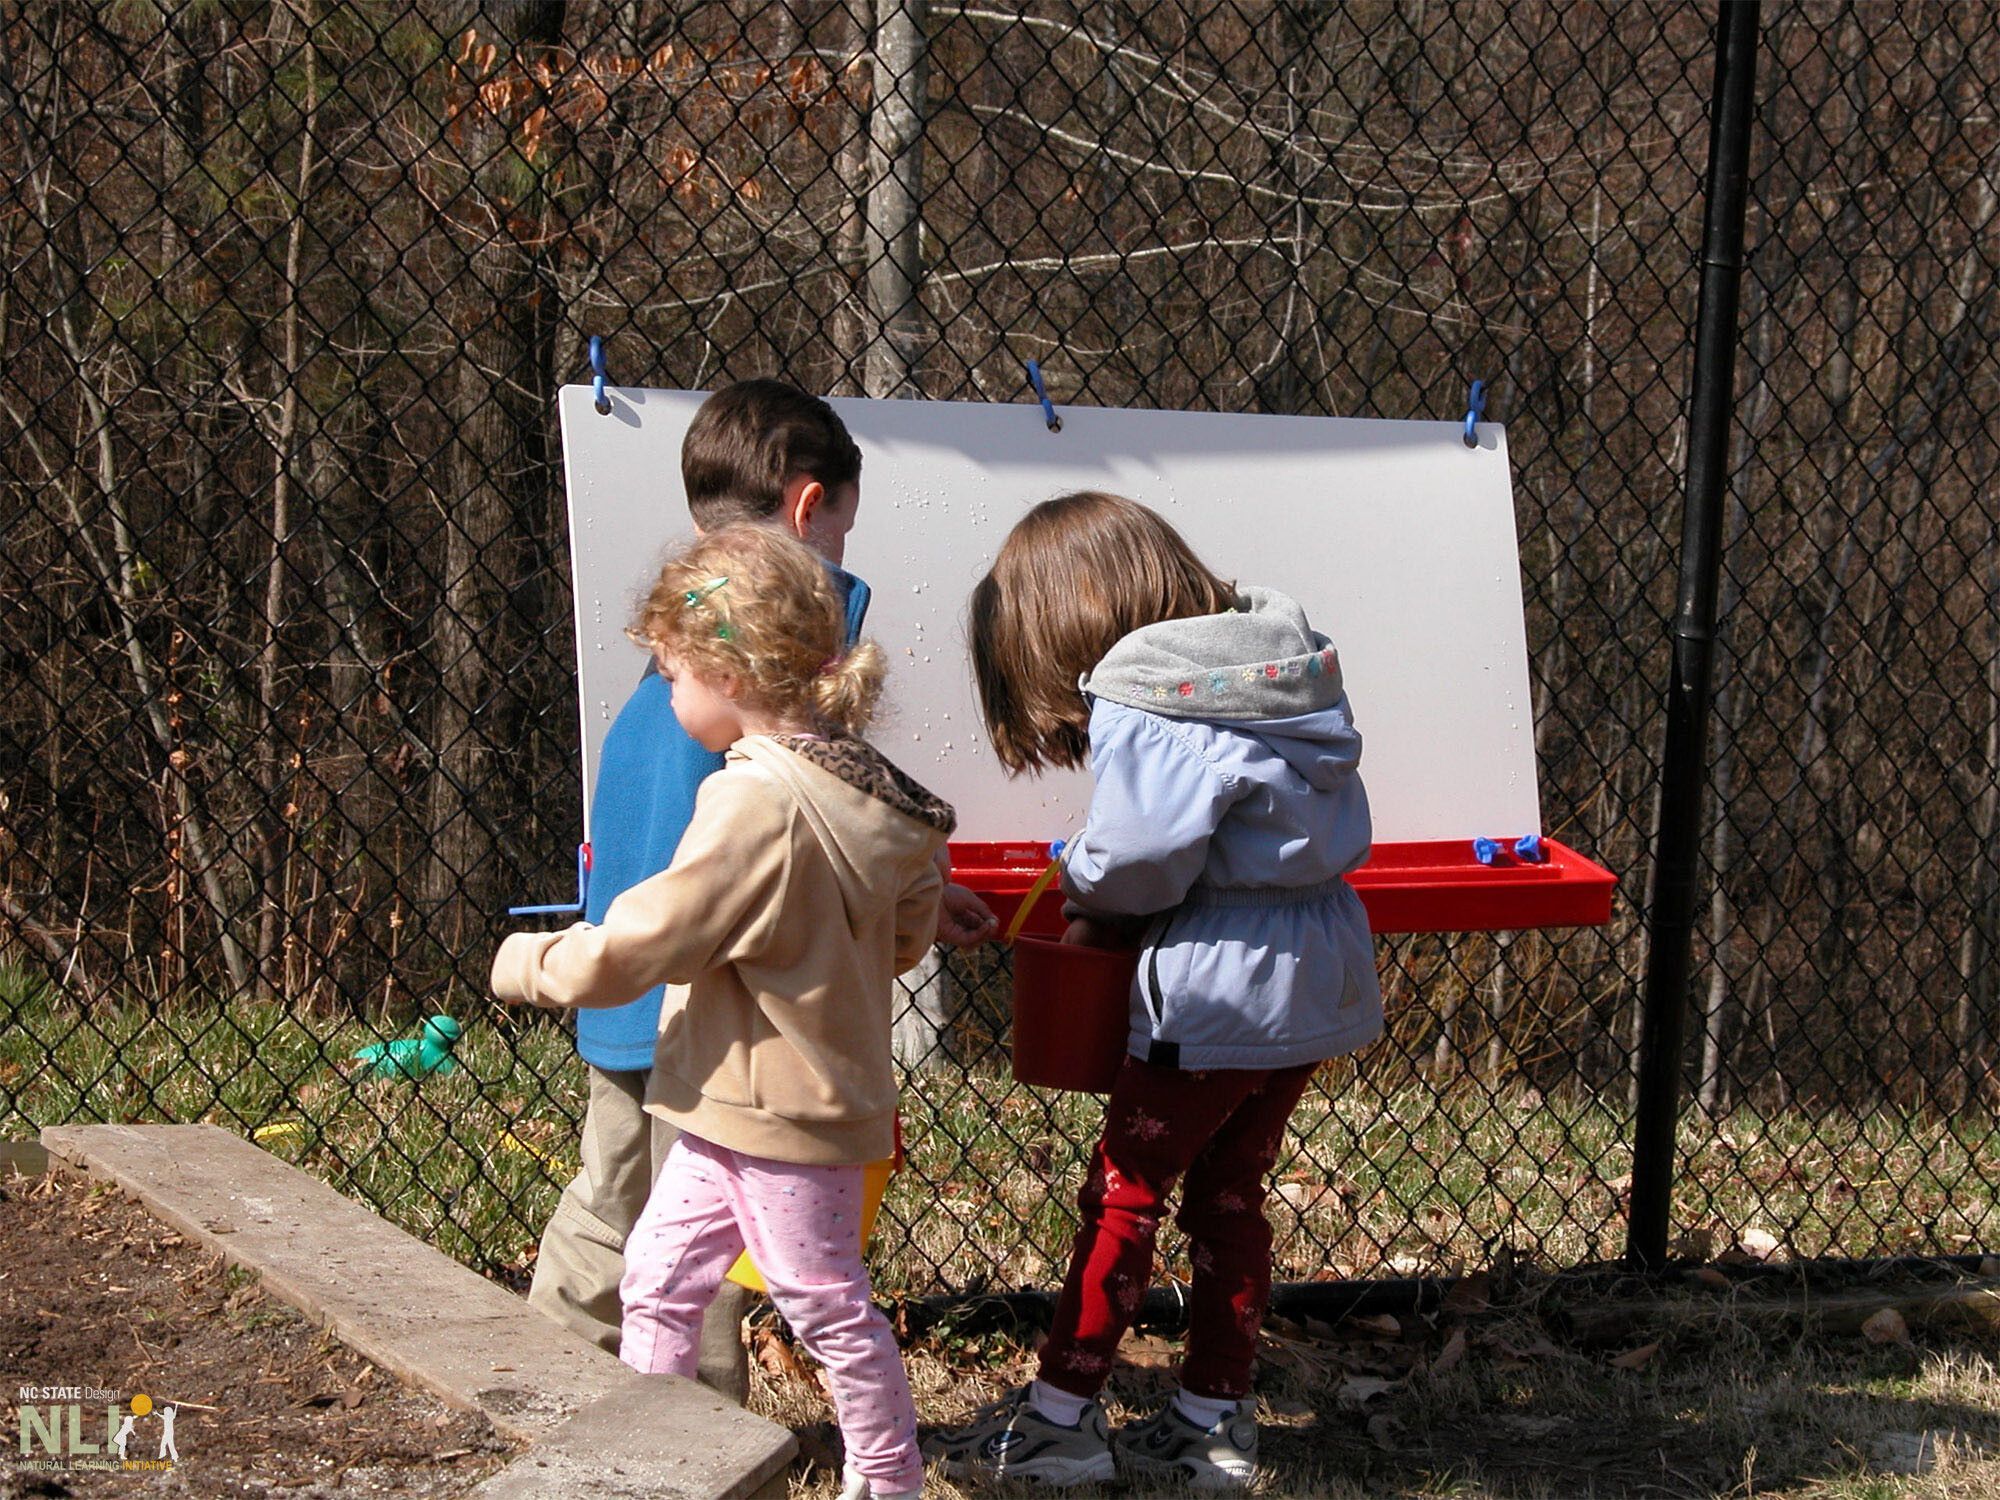 children engaging in ice play with a canvas ouside